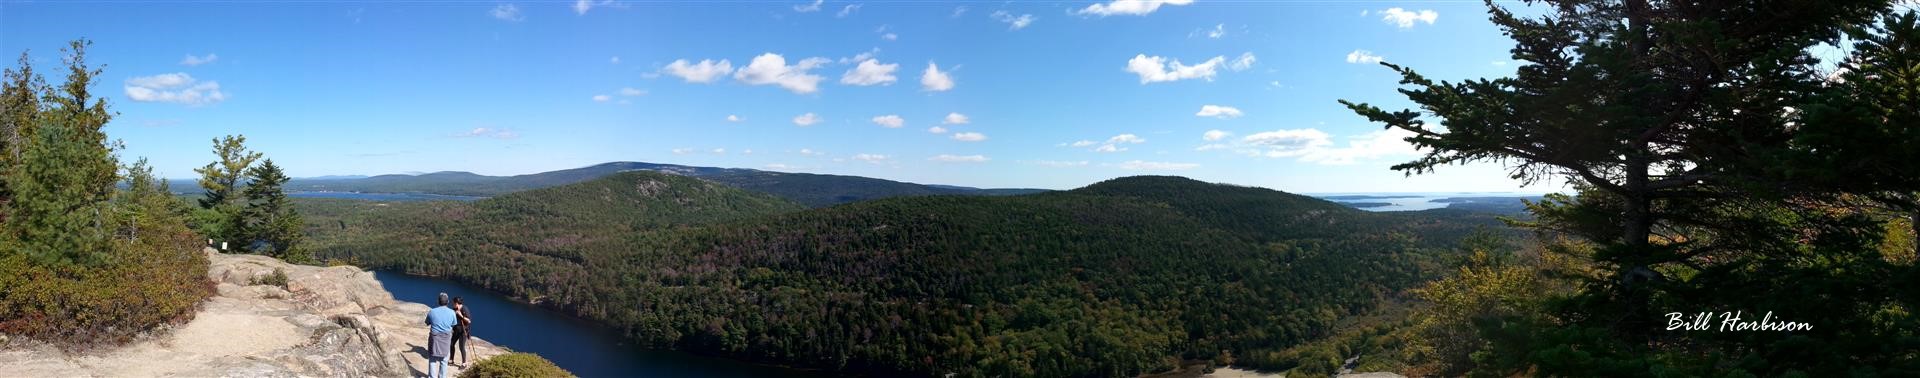 View from Beech Mountain Trail, Acadia